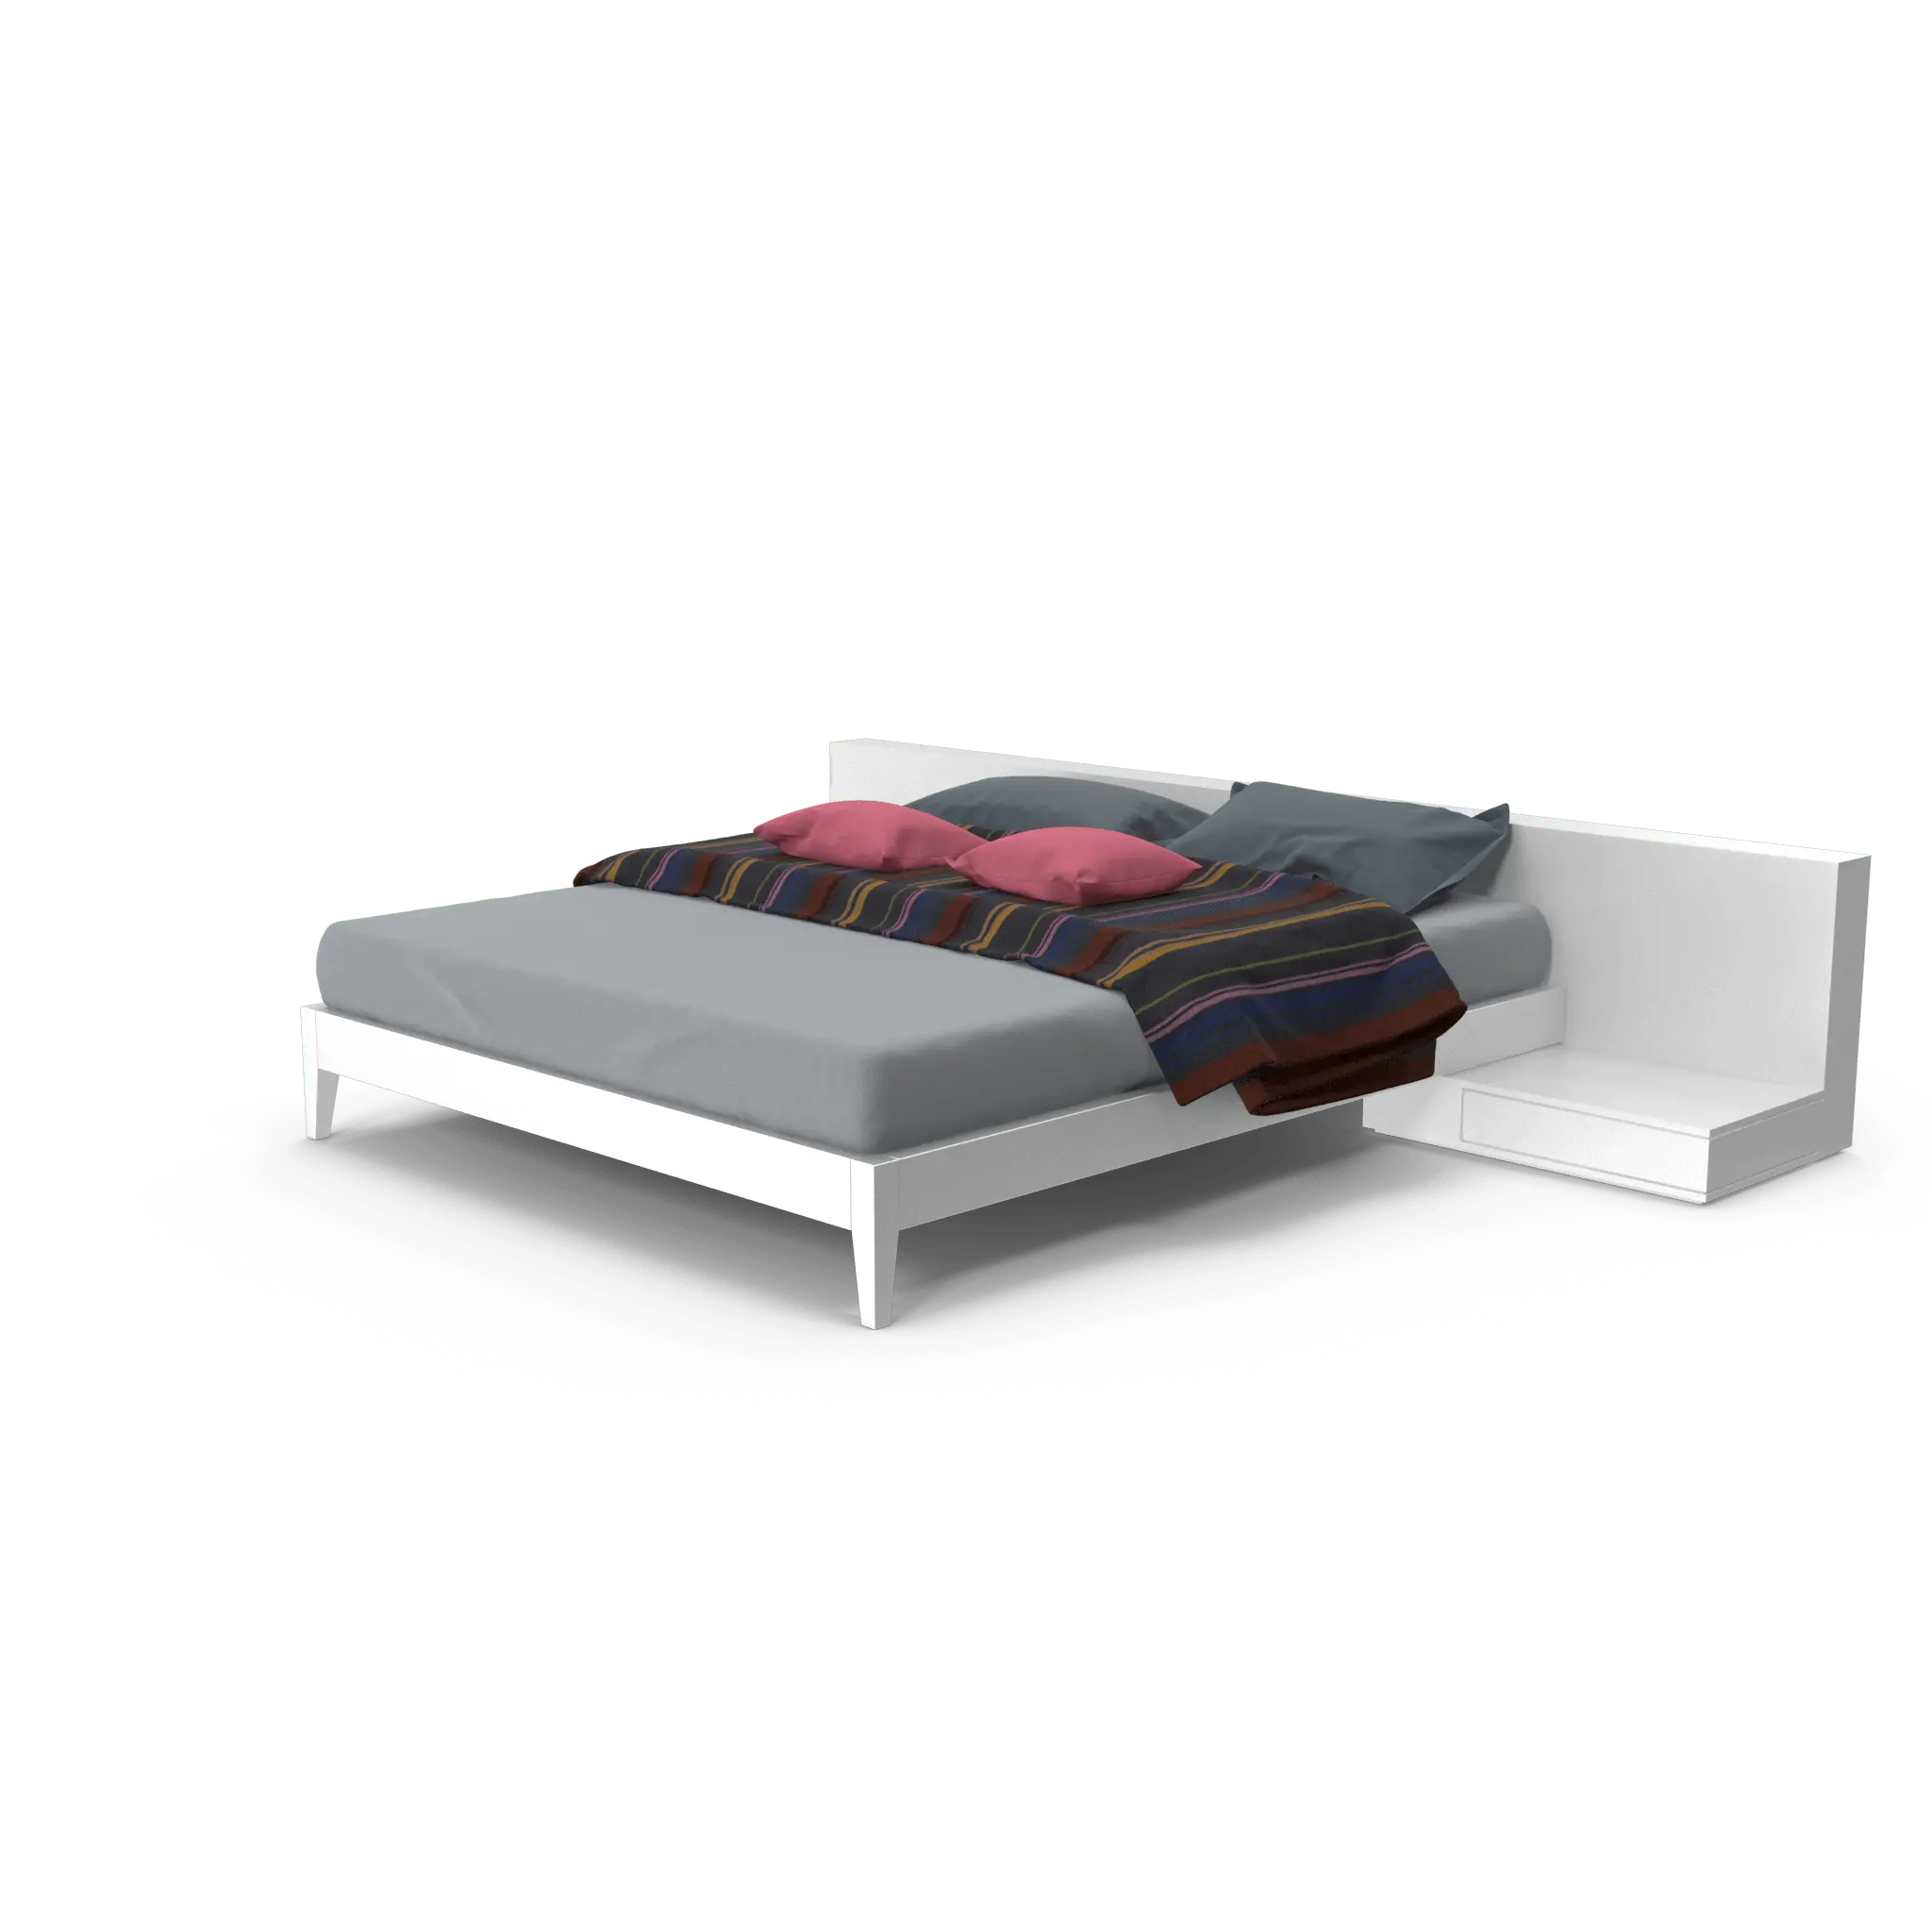 Levels Bed With Large Headboard.H03.2k-min